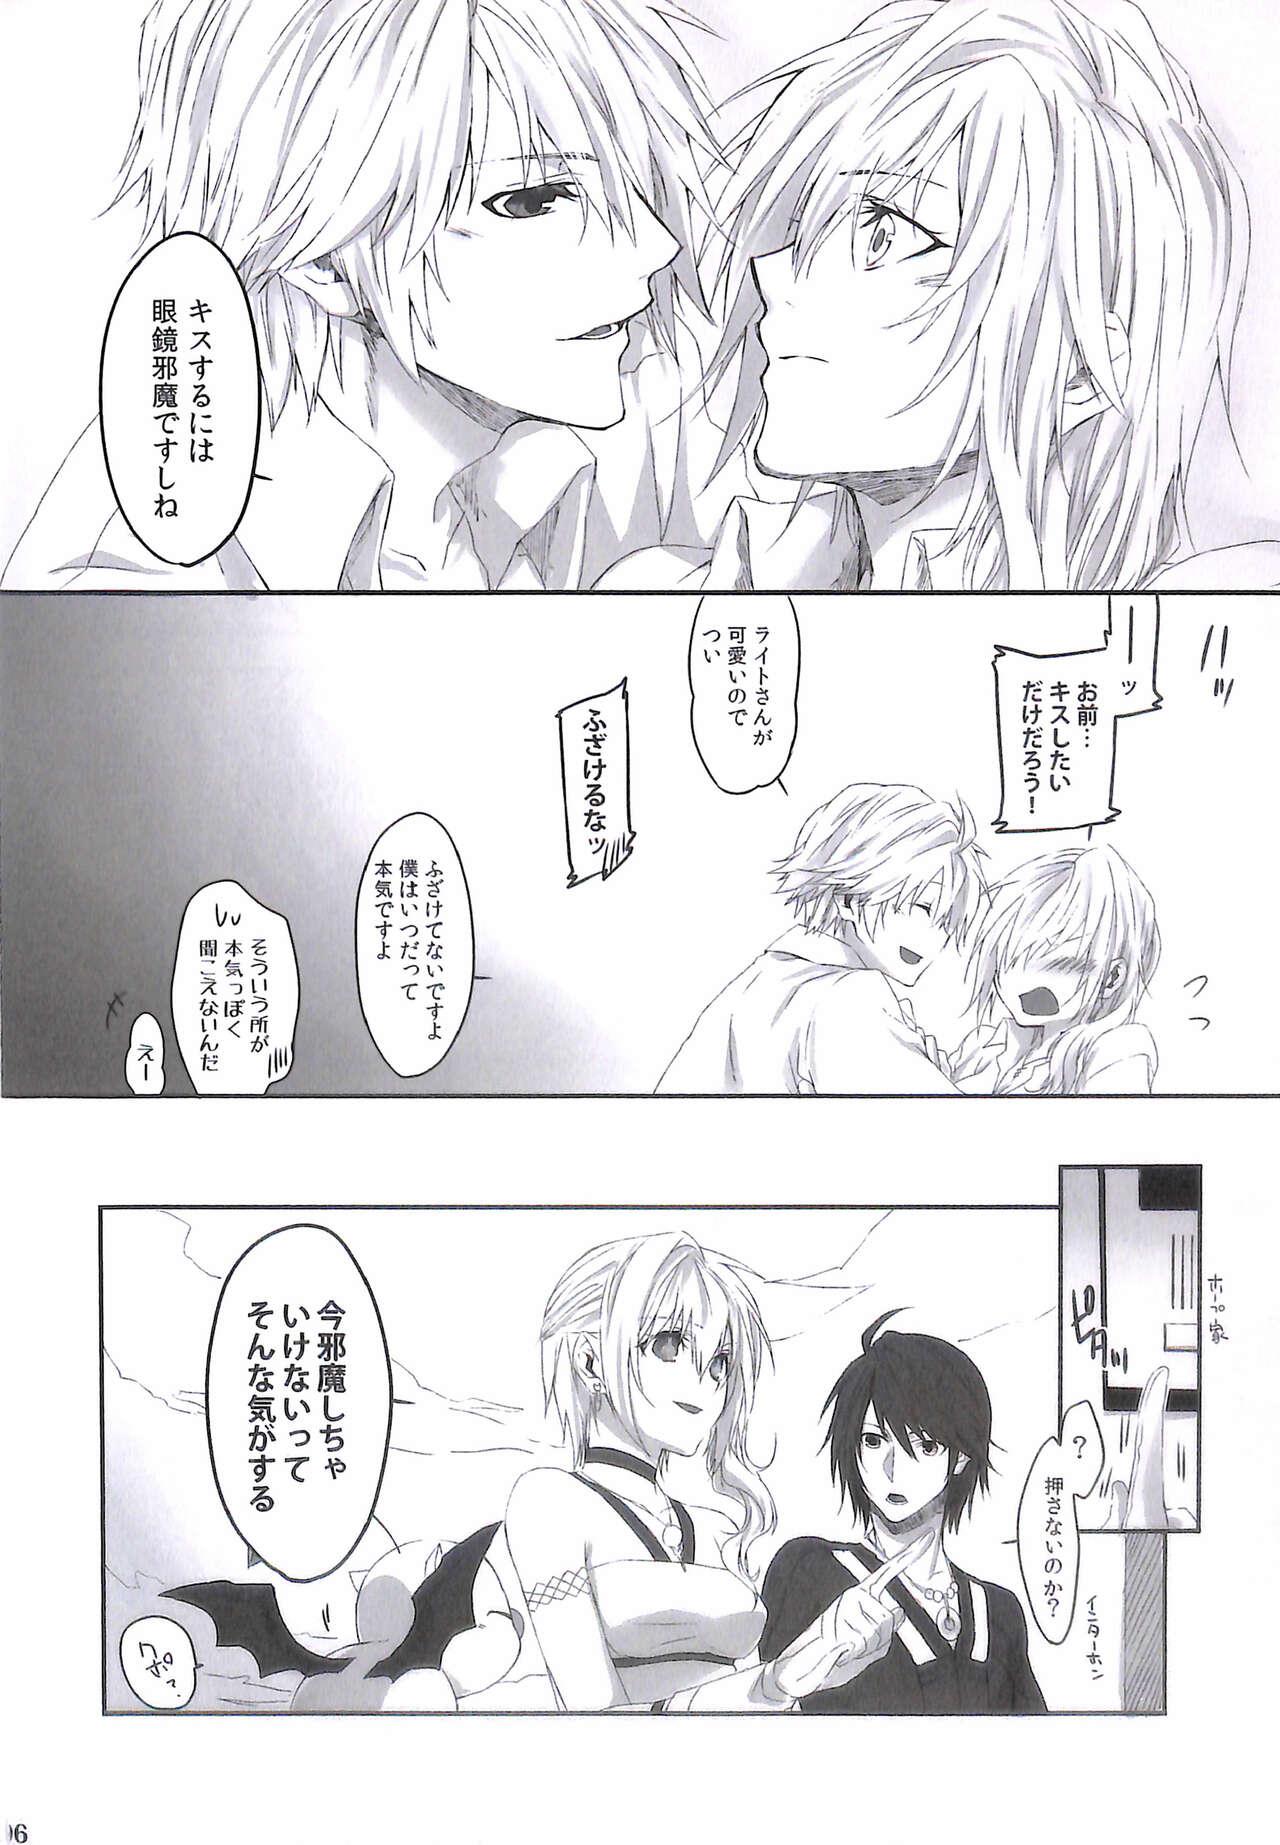 Story ONE DAY - Final fantasy xiii Gay Cumshot - Page 6